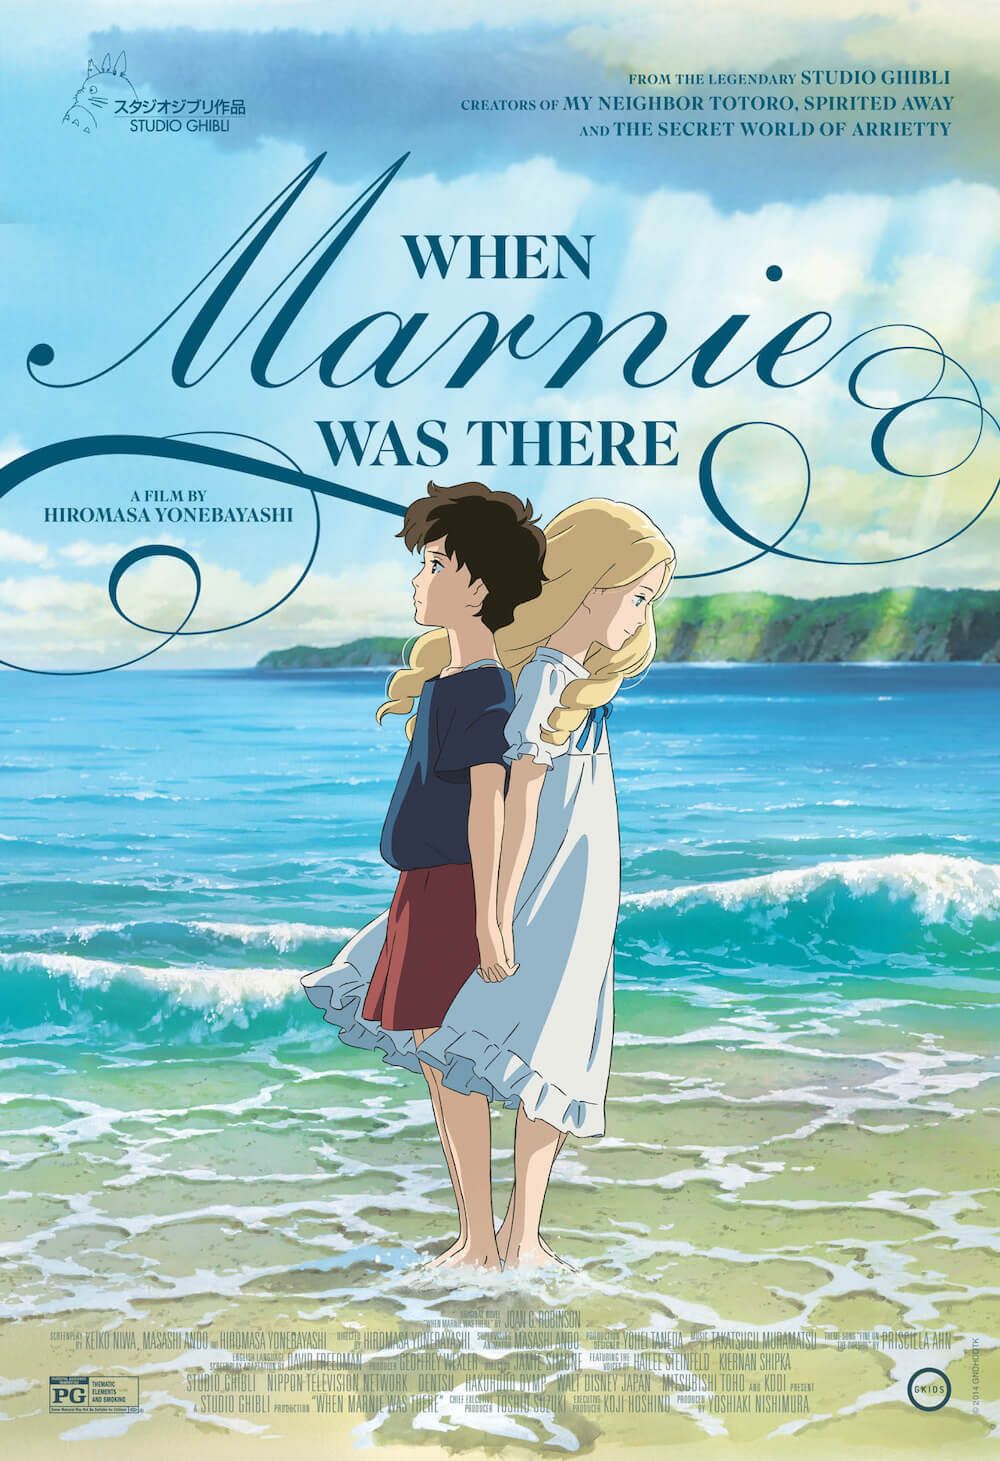 Watch When Marnie Was There today, it's one of the best Studio Ghibli movies, recommended for 9+ year olds.